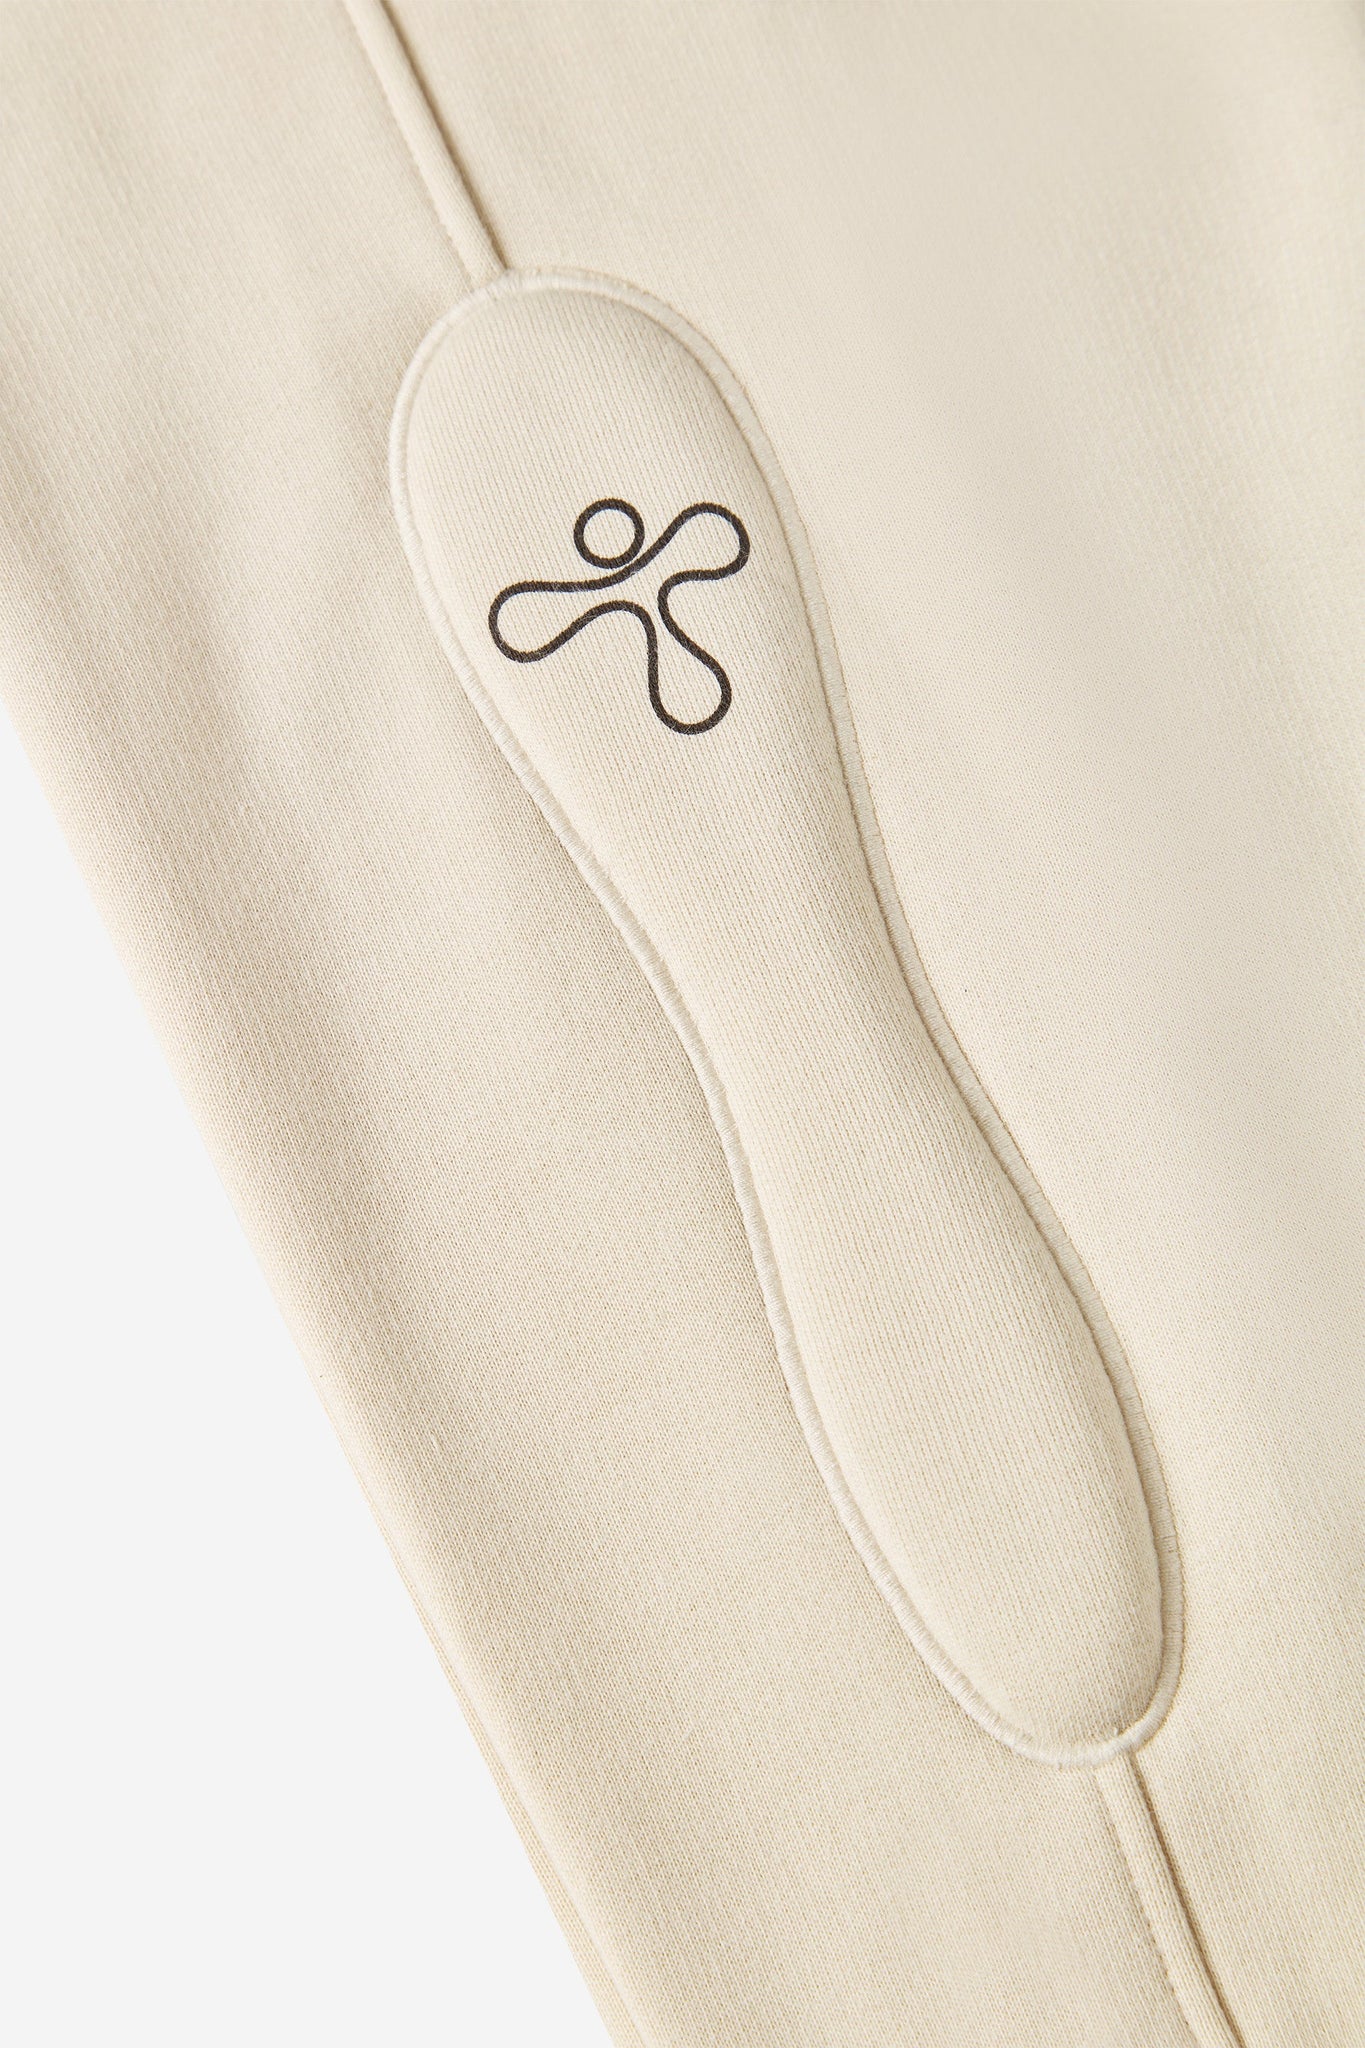 alt="detail of beige track pants with padded embroidered detail and print"